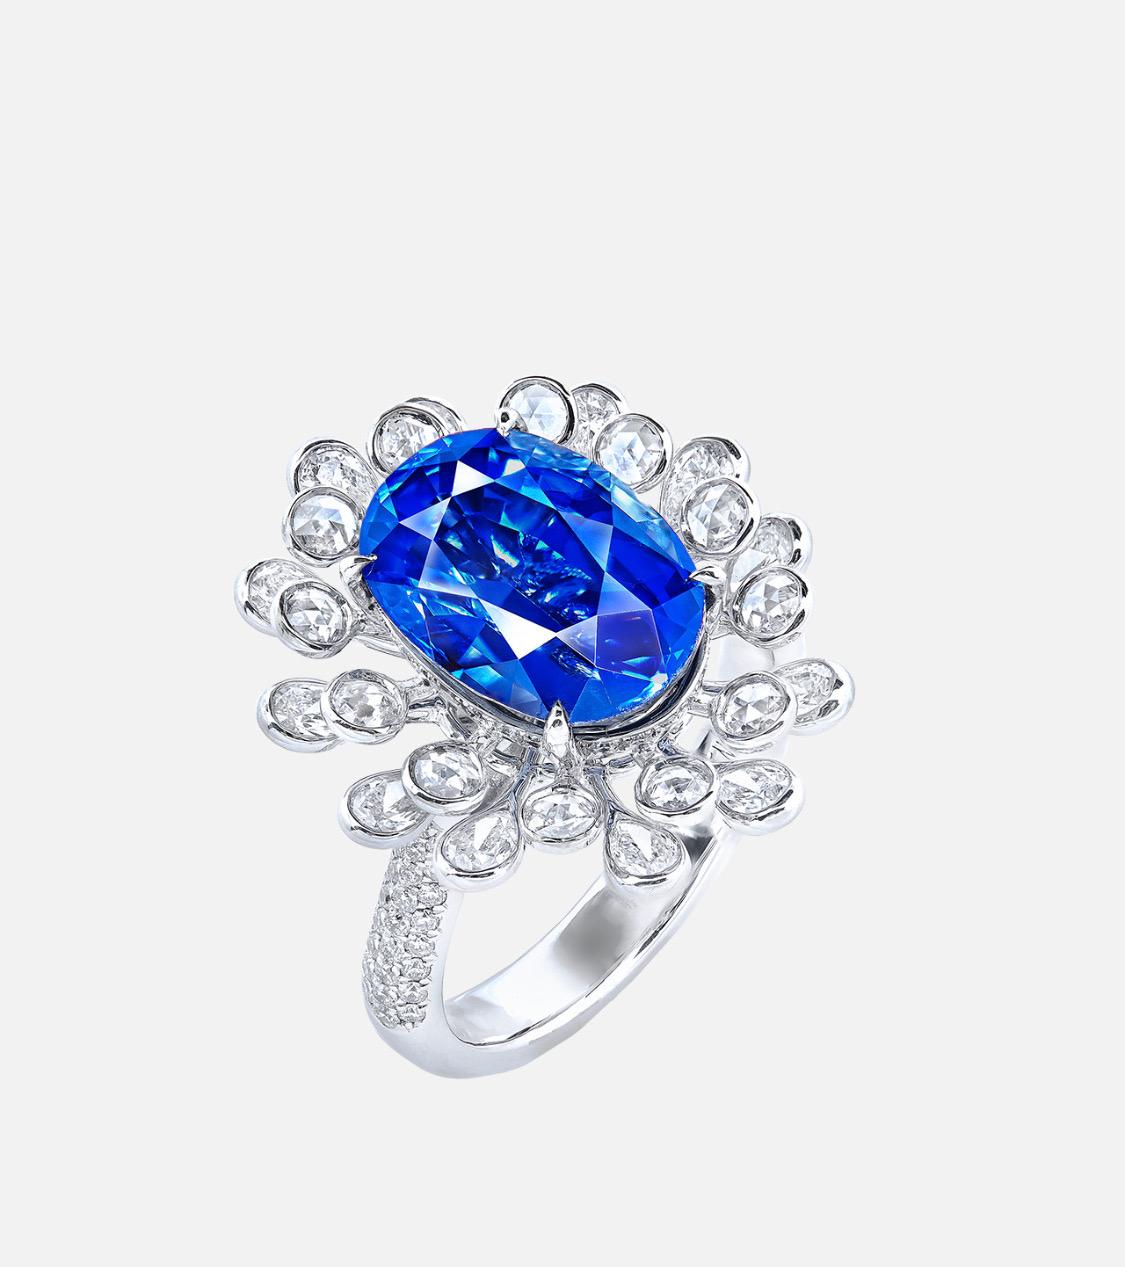 From The Vault at Emilio Jewelry Located on New York's iconic Fifth Avenue,
Showcasing a very special and rare certified natural kashmir sapphire.
 Hand made in the Emilio Jewelry Atelier, whom specializes in rare collectible pieces in  Natural